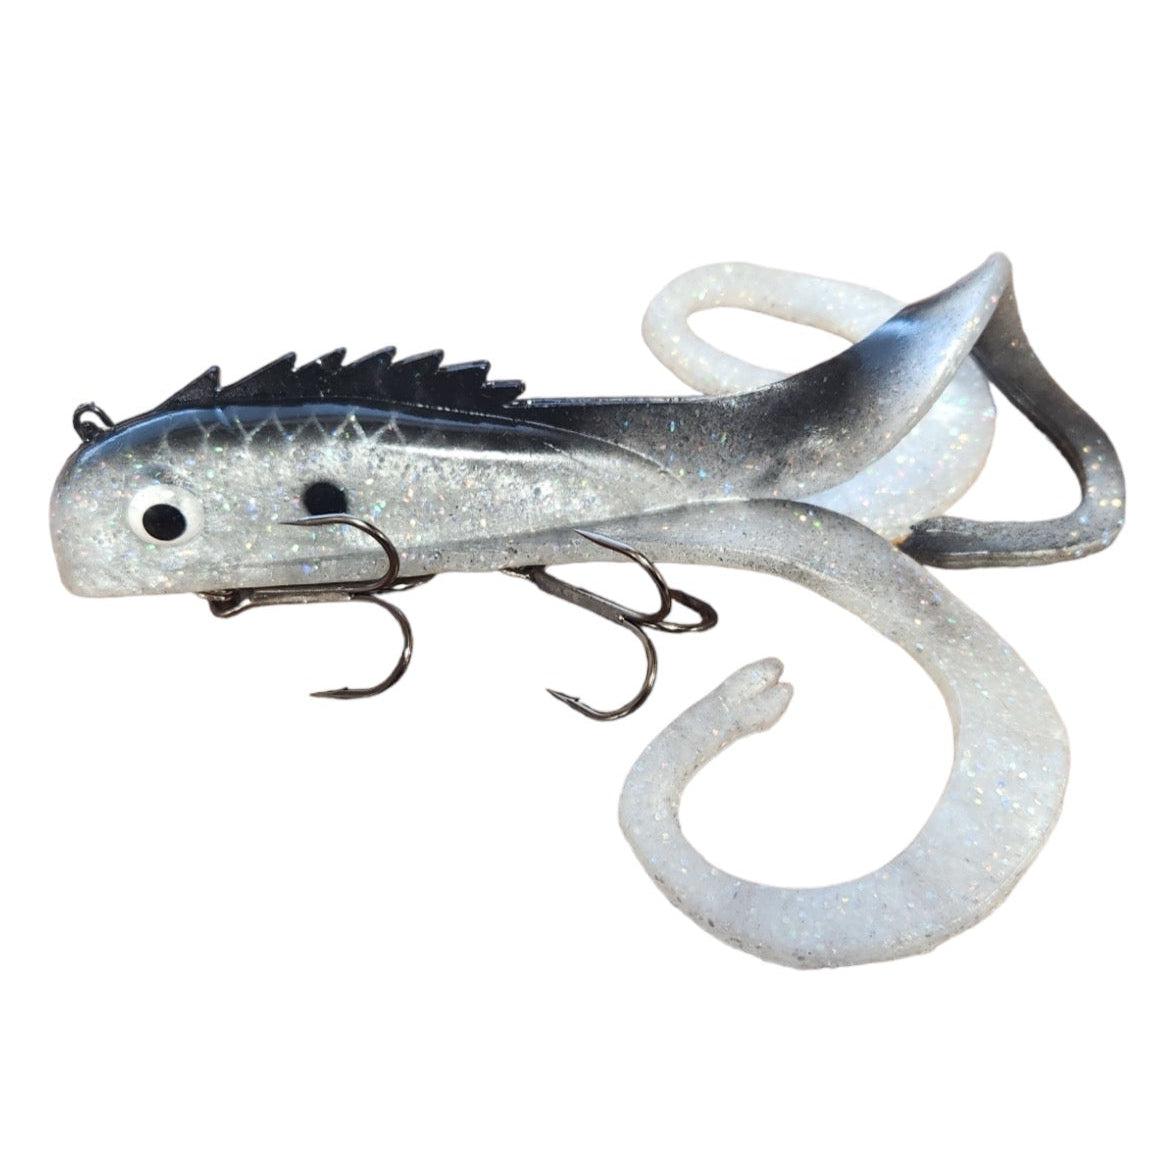 View of Rubber Chaos Tackle Medussa Husky Silver Shad available at EZOKO Pike and Musky Shop